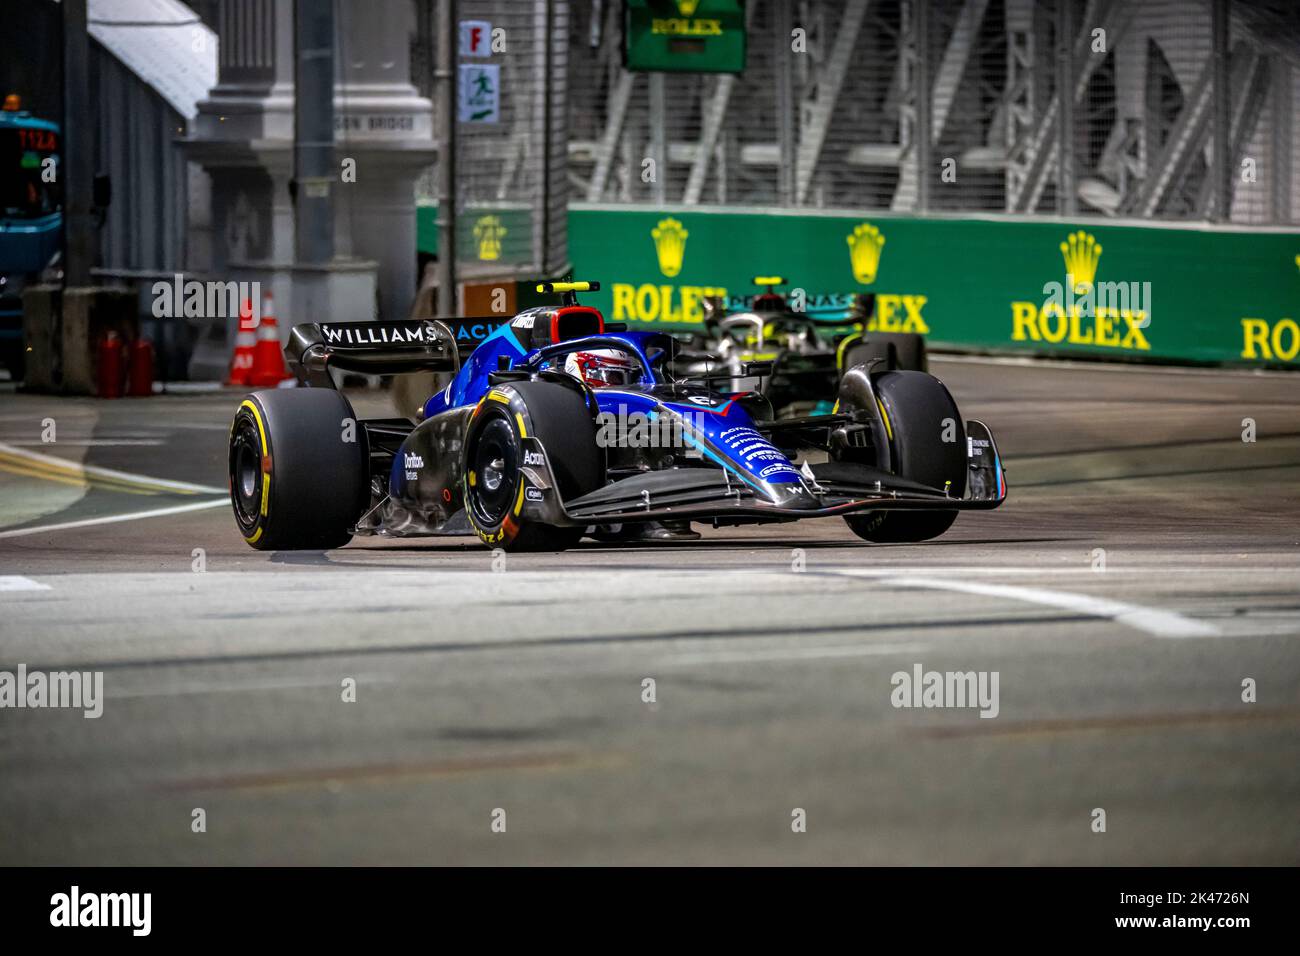 Marina Bay, Singapore, 30th Sep 2022, Nicholas Latifi, from Canada competes for Williams Racing. Practice, round 17 of the 2022 Formula 1 championship. Credit: Michael Potts/Alamy Live News Stock Photo